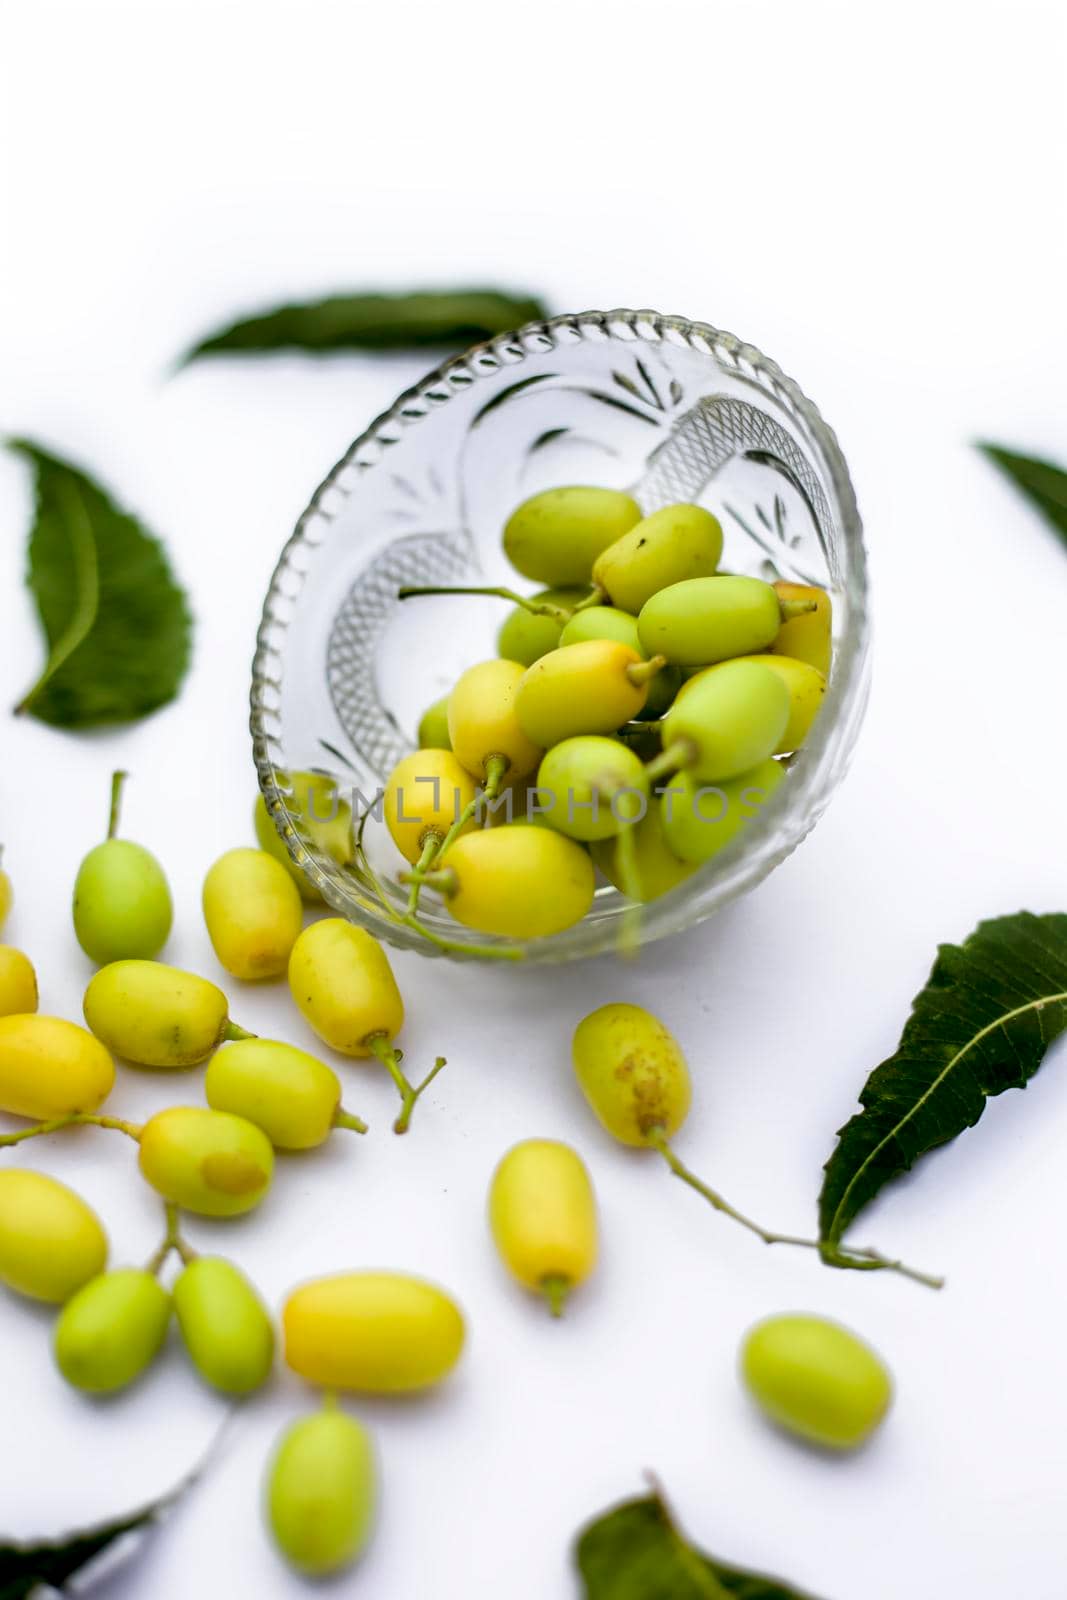 Neem fruit or nim fruit or Indian lilac fruit in a glass bowl isolated on white along with some fresh leaves also.